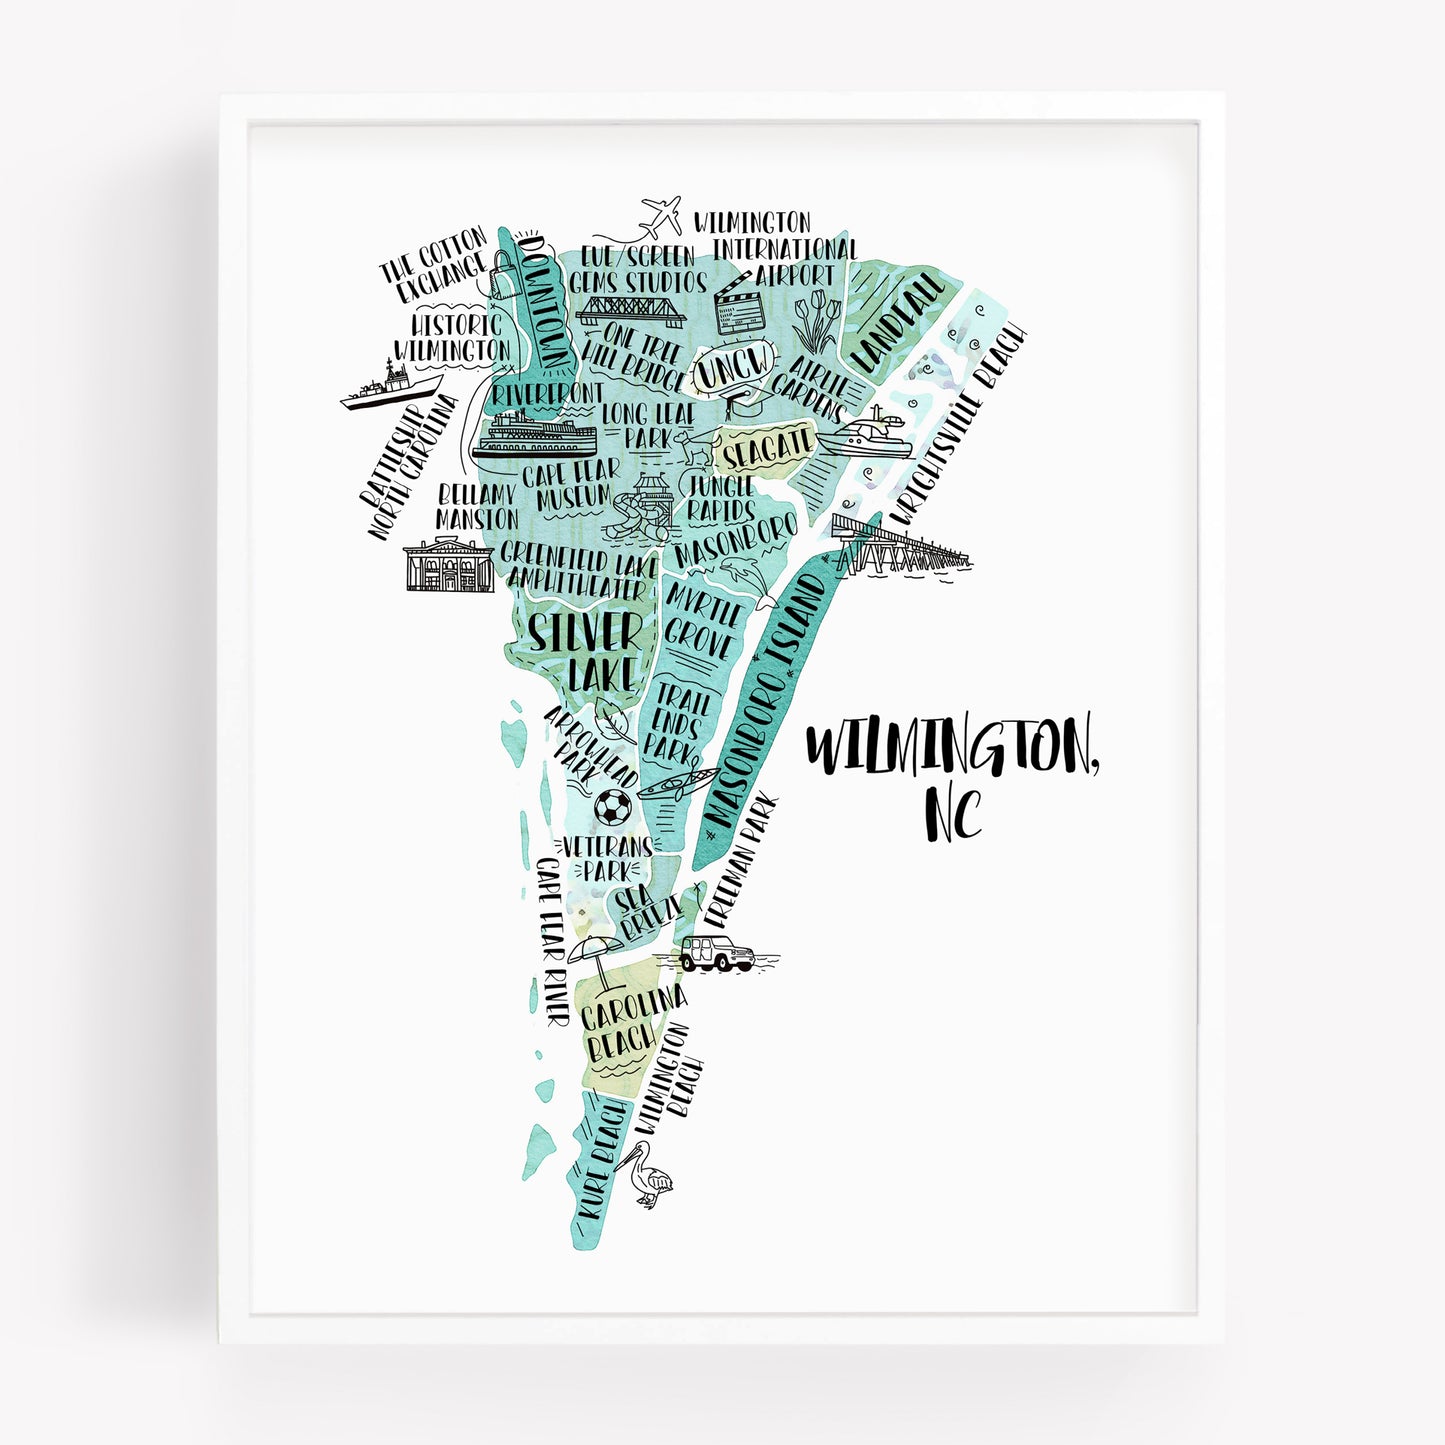 An illustrated map of Wilmington North Carolina, as a print, in the color teal